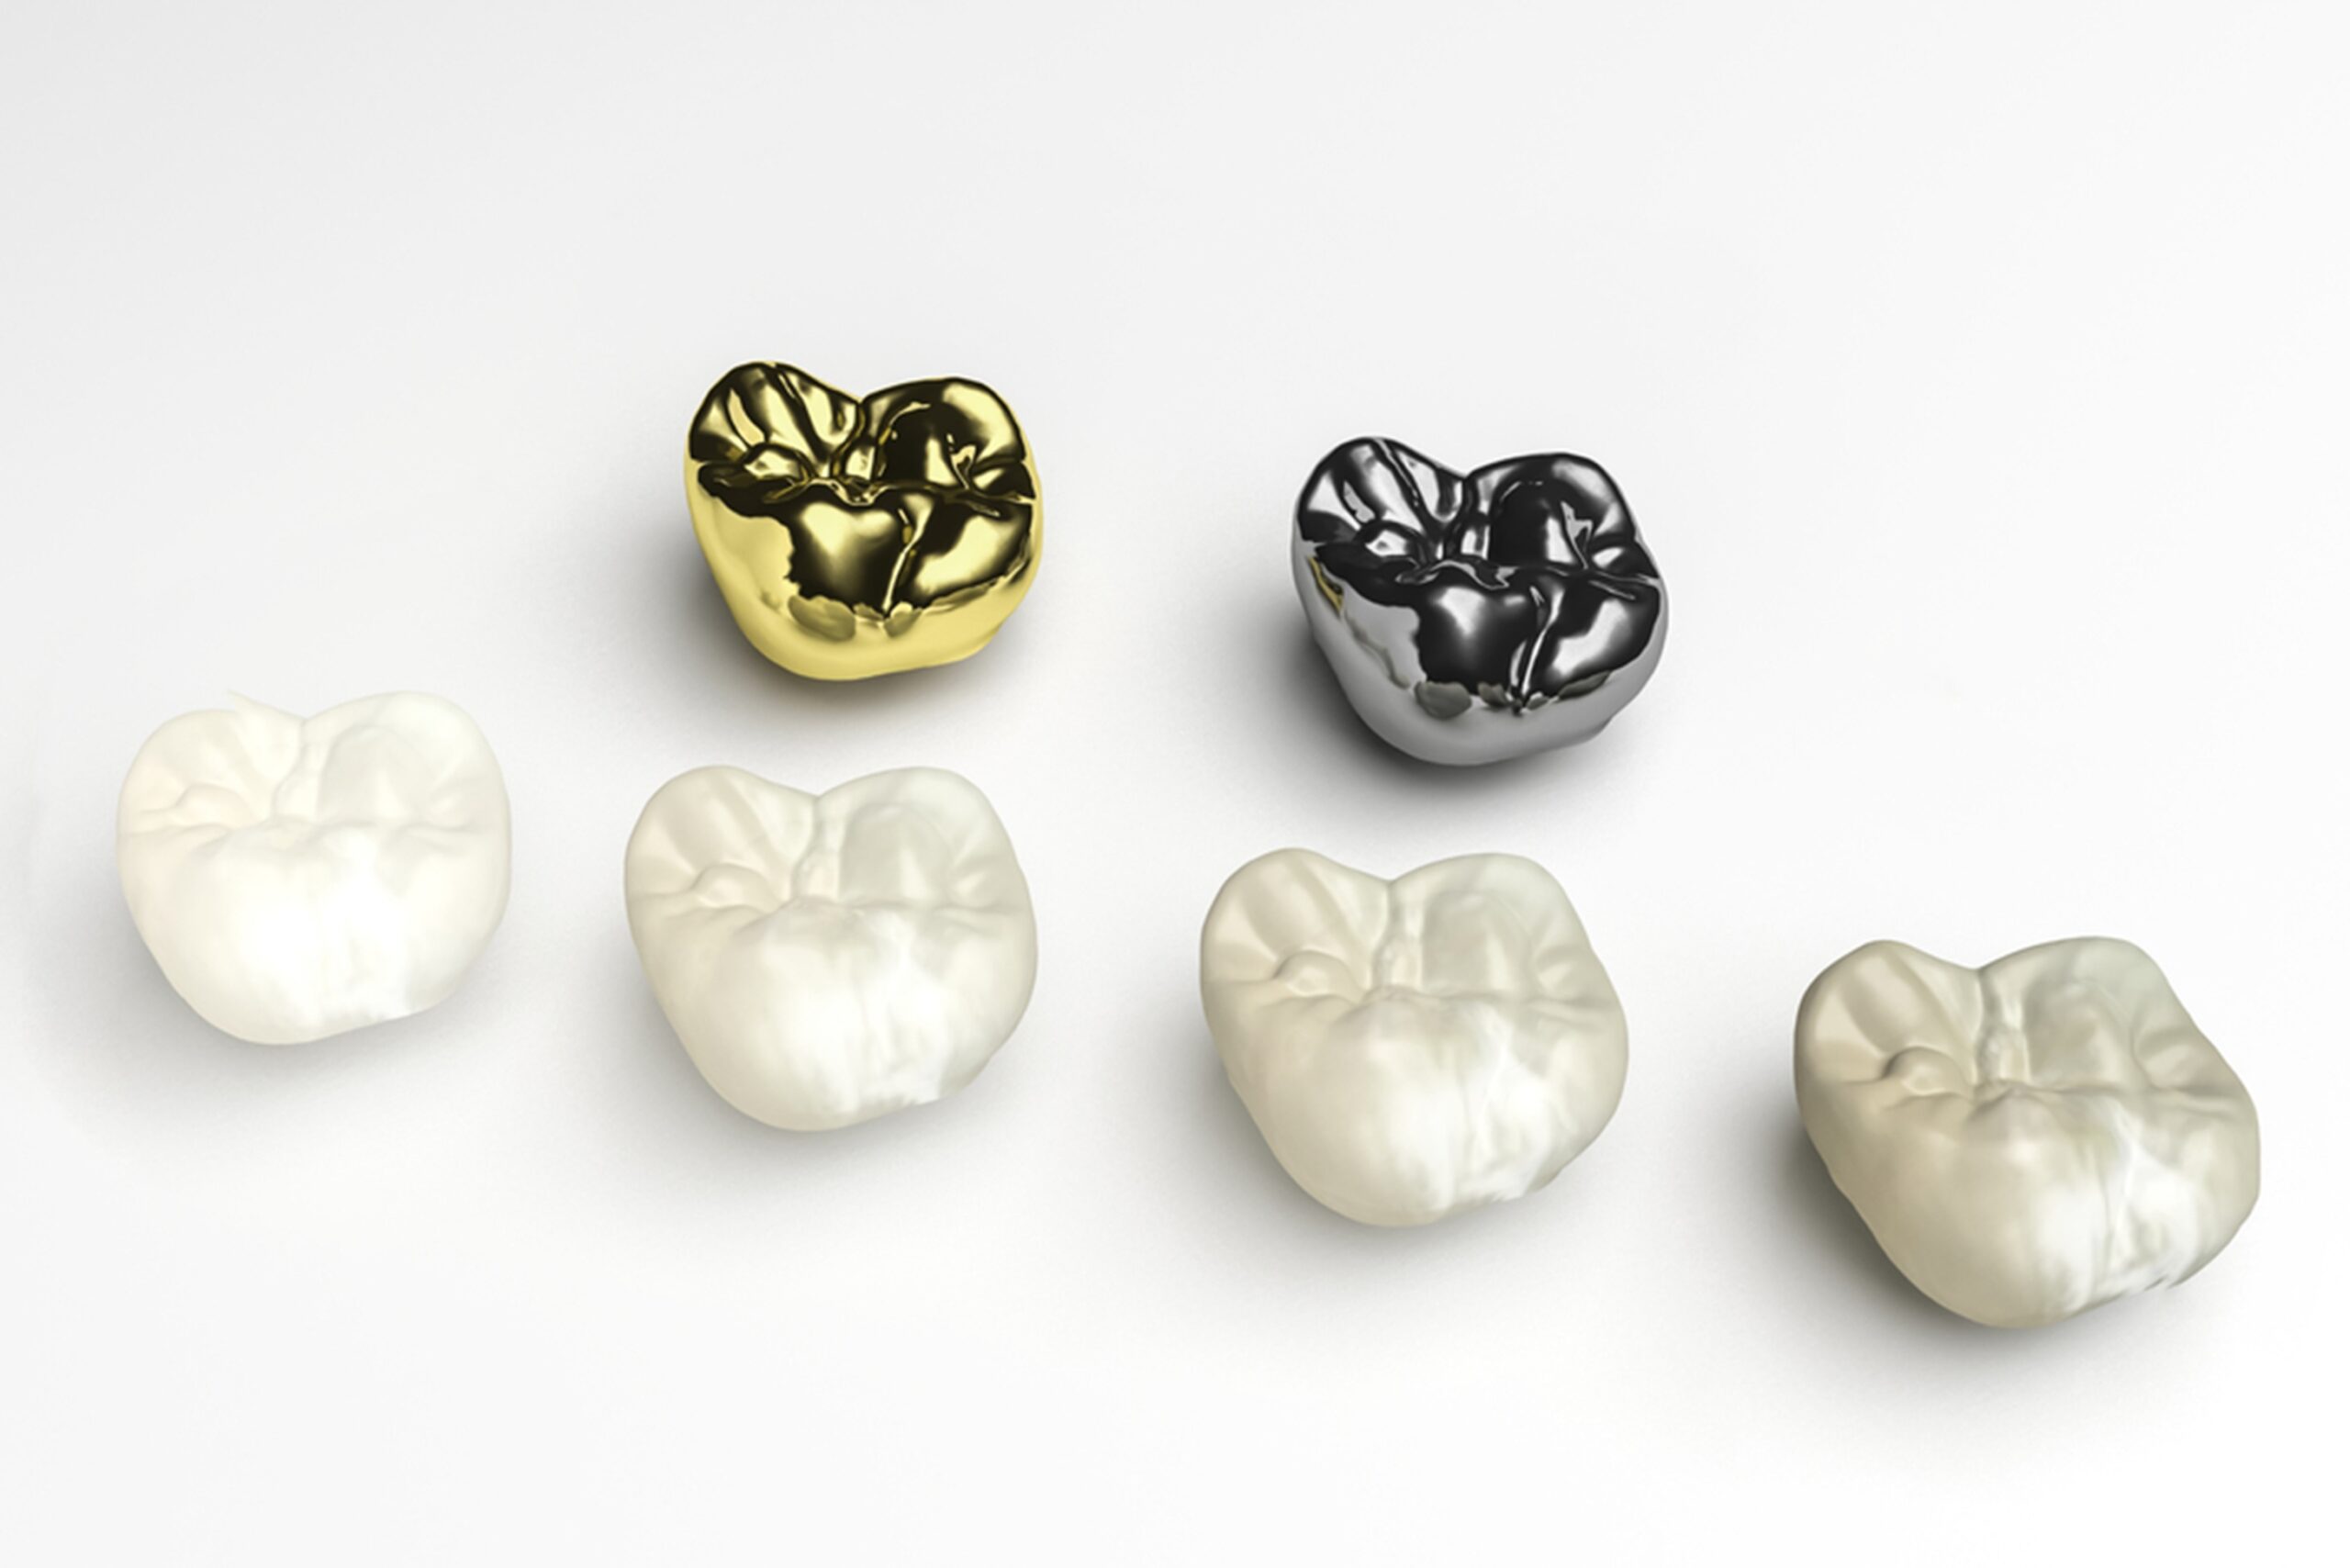 What Materials are Dental Crowns Made of